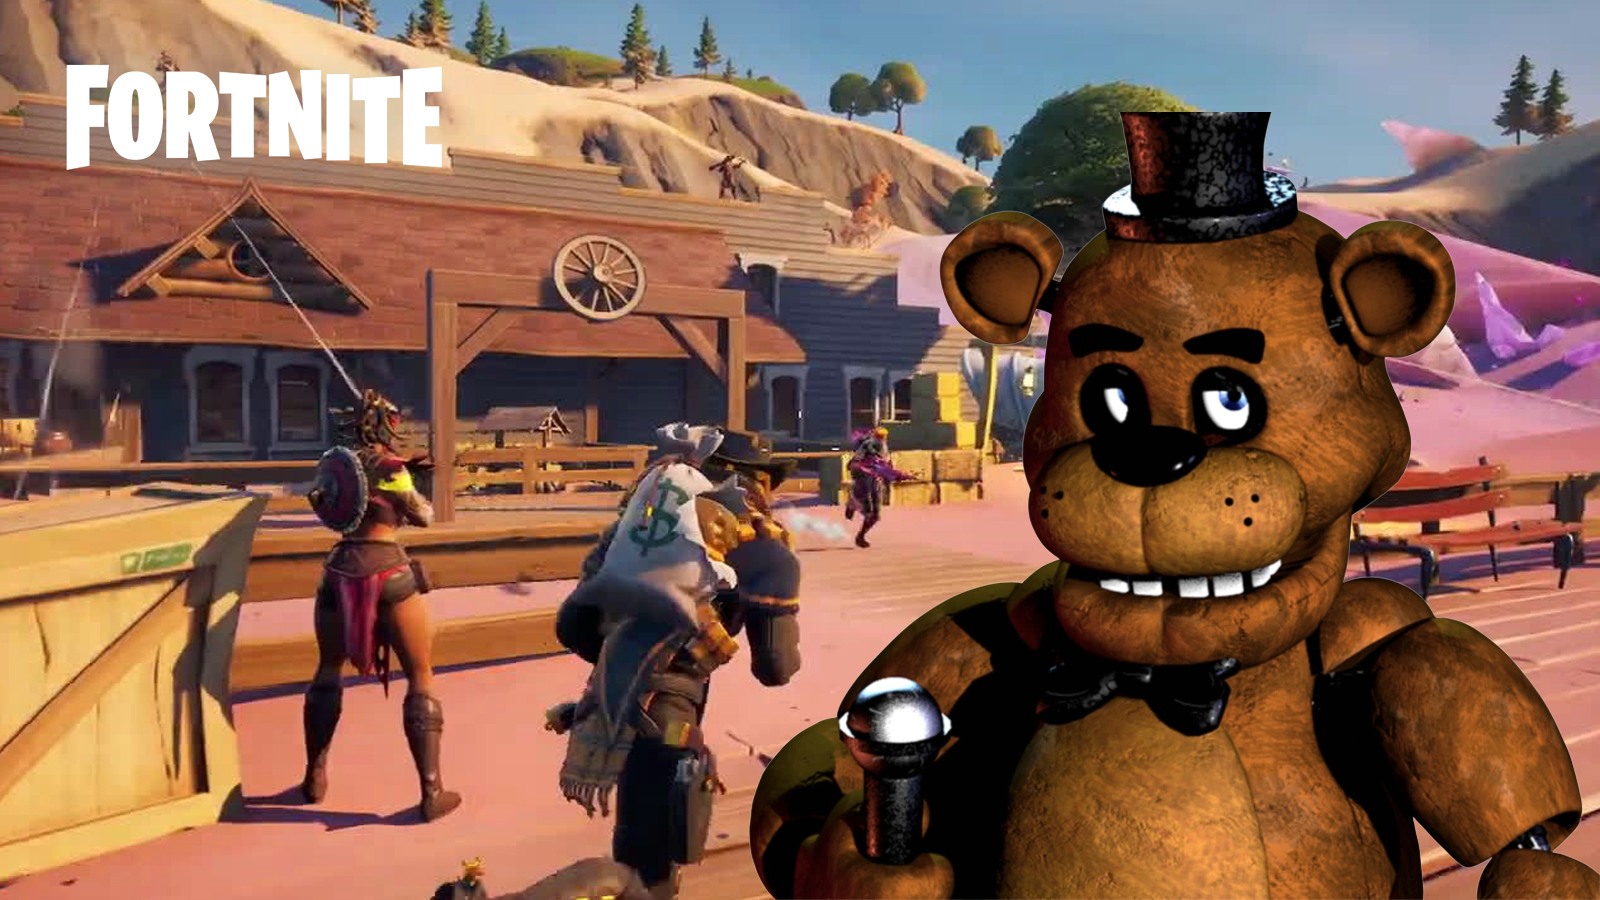 FIRST LOOK AT FIVE NIGHTS AT FREDDYS COLLAB IN #FORTNITE #gaming #fyp